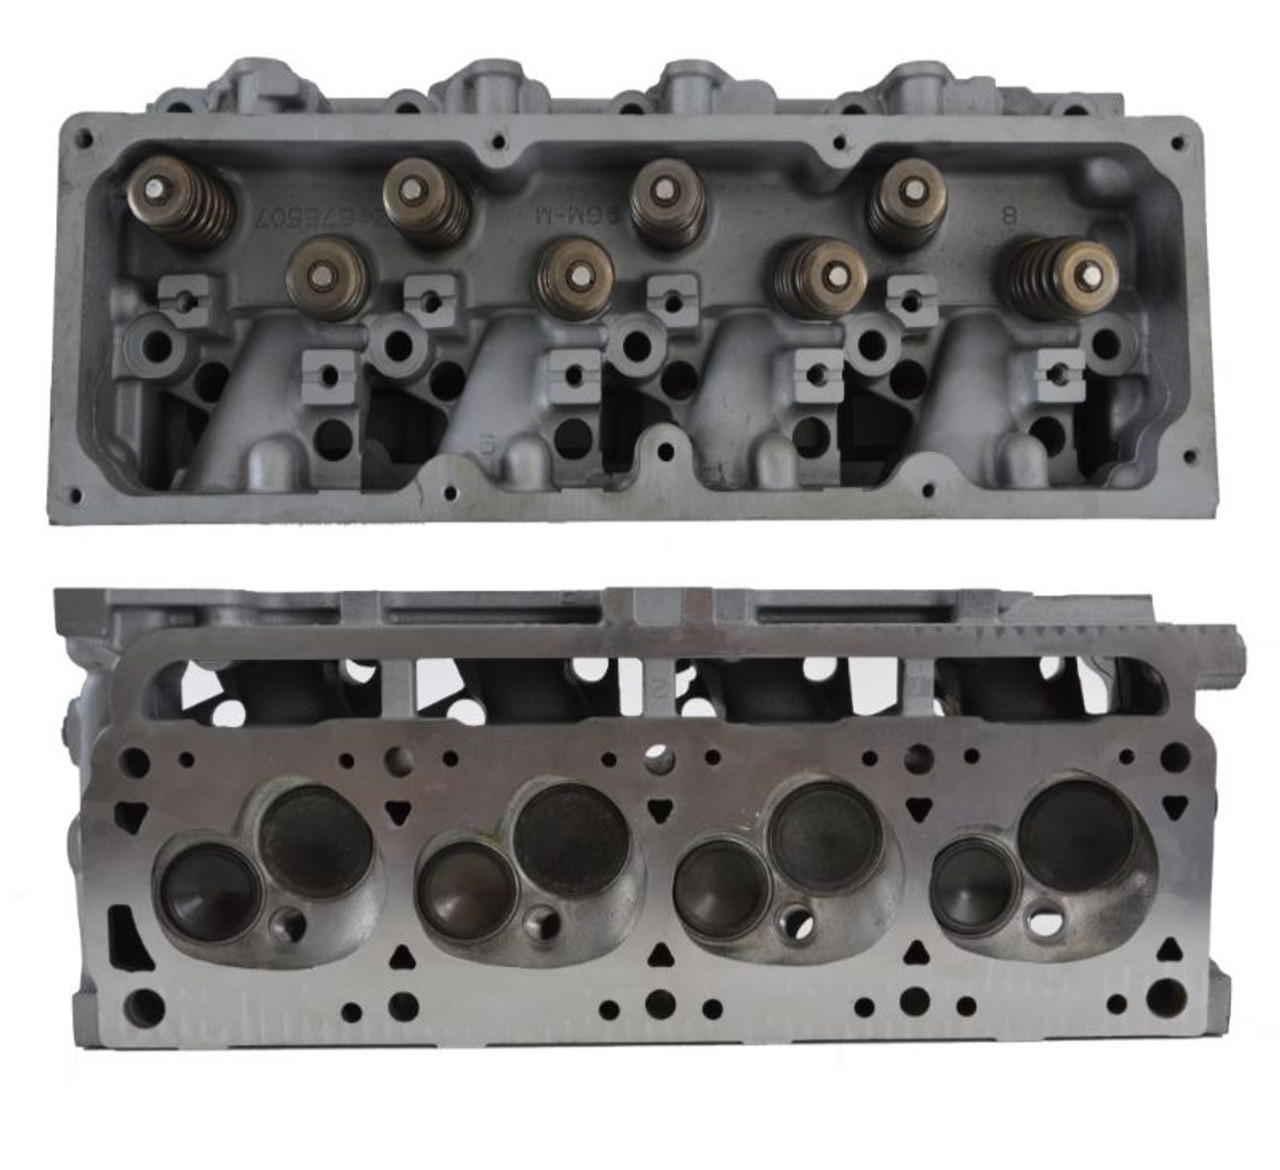 Cylinder Head Assembly - 1998 GMC Sonoma 2.2L (CH1047R.A3)